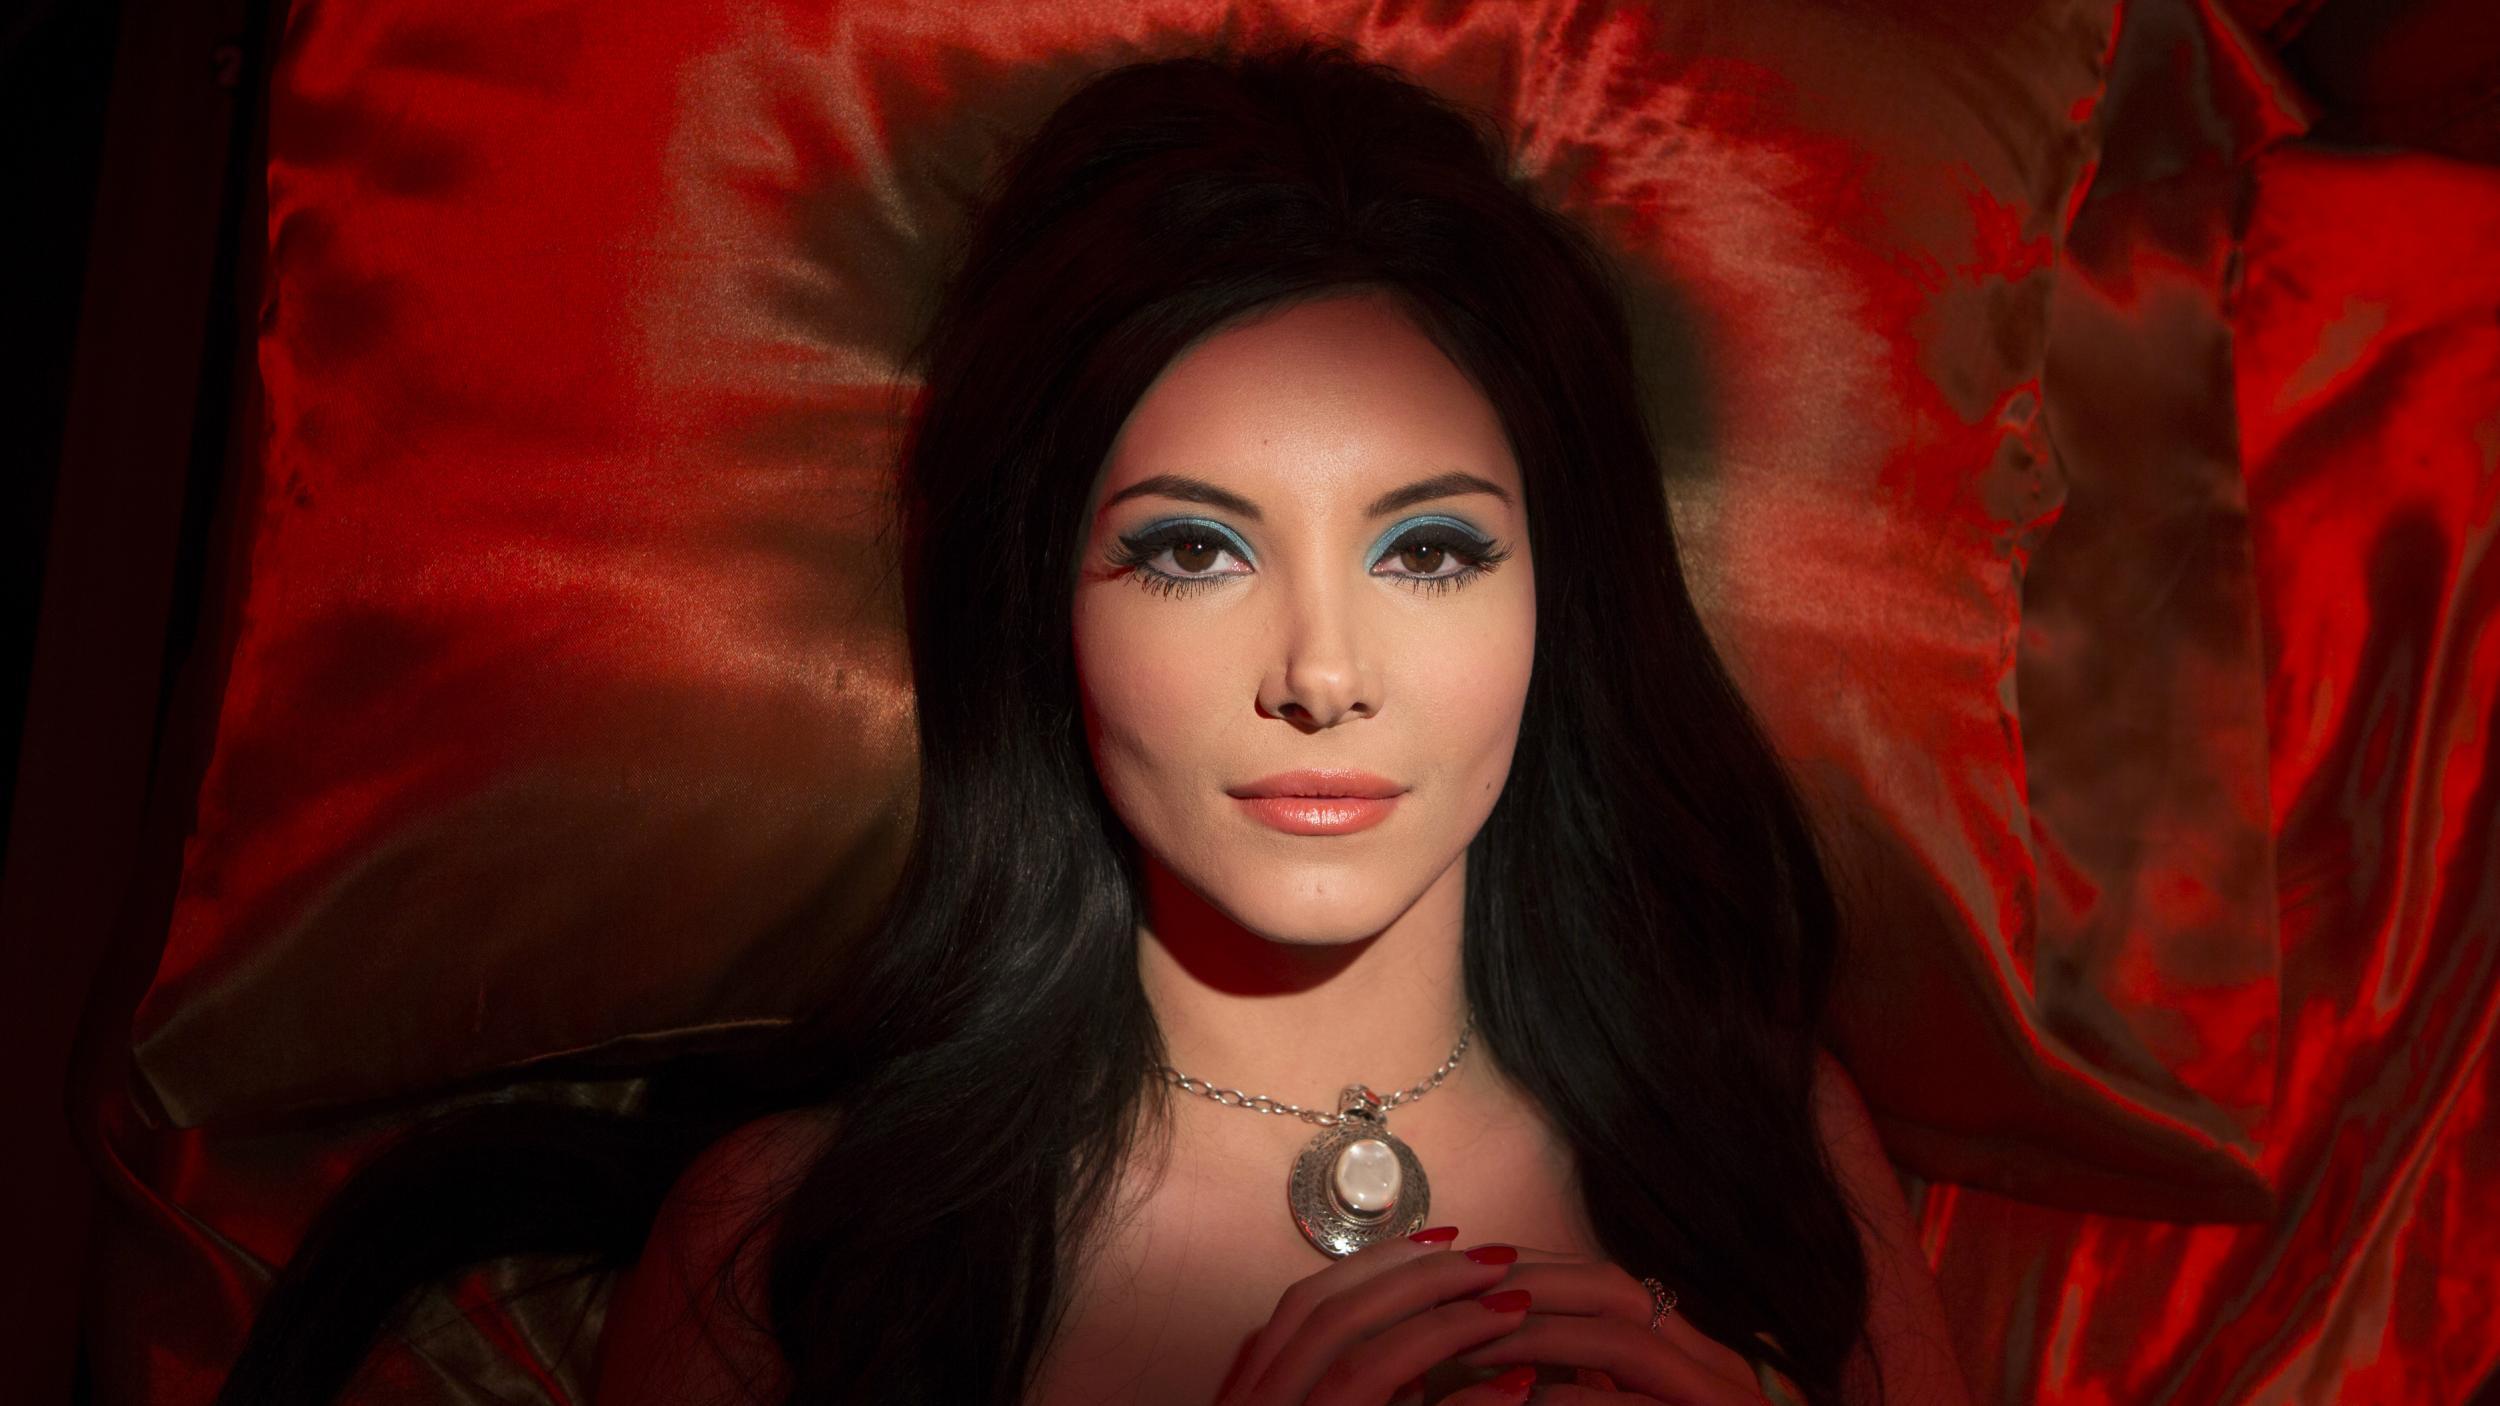 Samantha Robinson plays a young witch determined to find love in Anna Biller’s ‘The Love Witch’